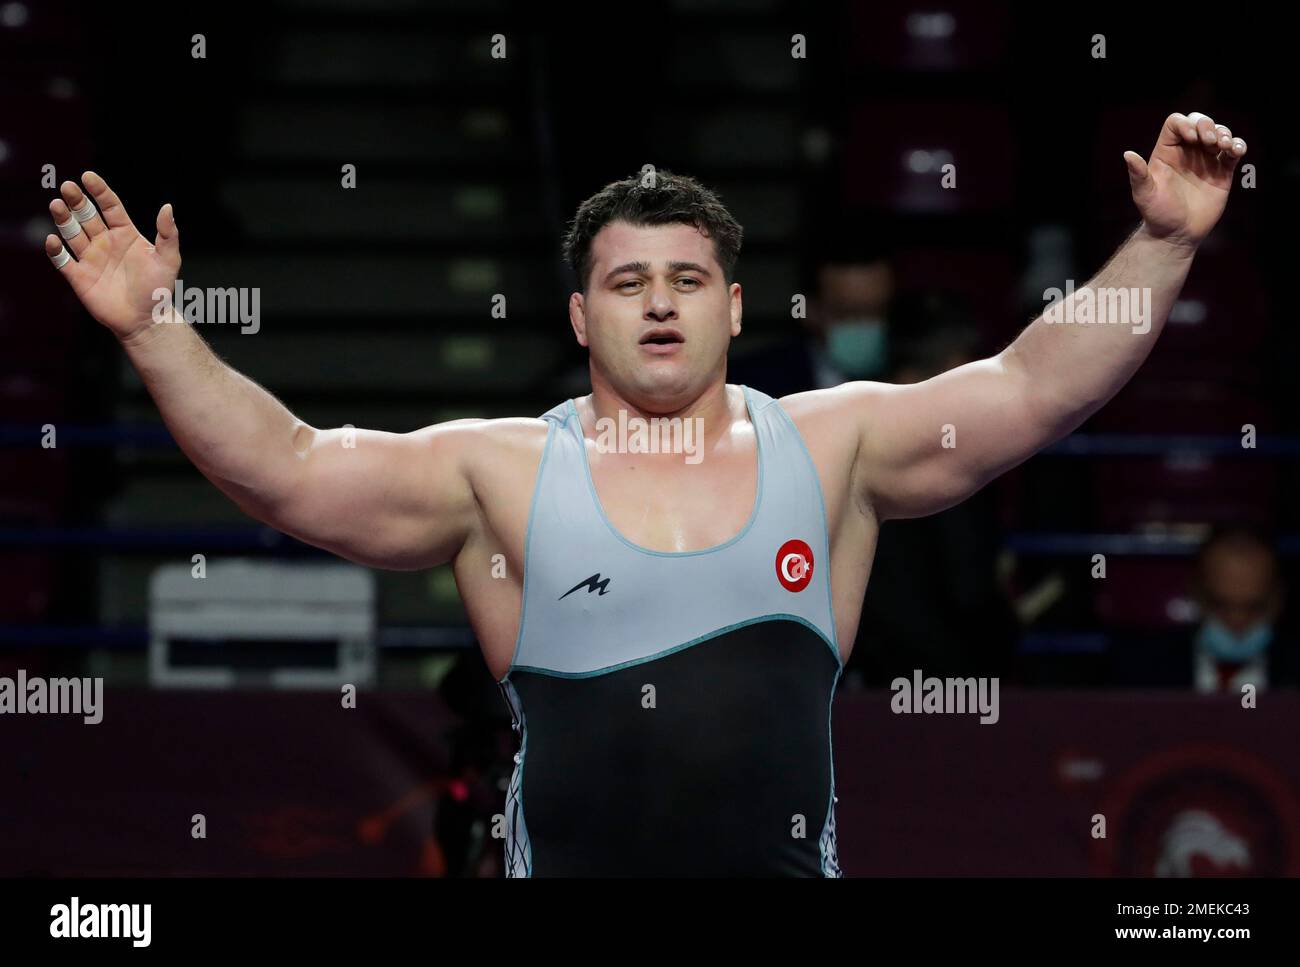 https://c8.alamy.com/comp/2MEKC43/riza-kayaalp-of-turkey-celebrates-after-winning-the-gold-medal-in-the-mens-130kg-category-bout-at-the-european-wrestling-championships-in-warsaw-poland-saturday-april-24-2021ap-photoczarek-sokolowski-2MEKC43.jpg